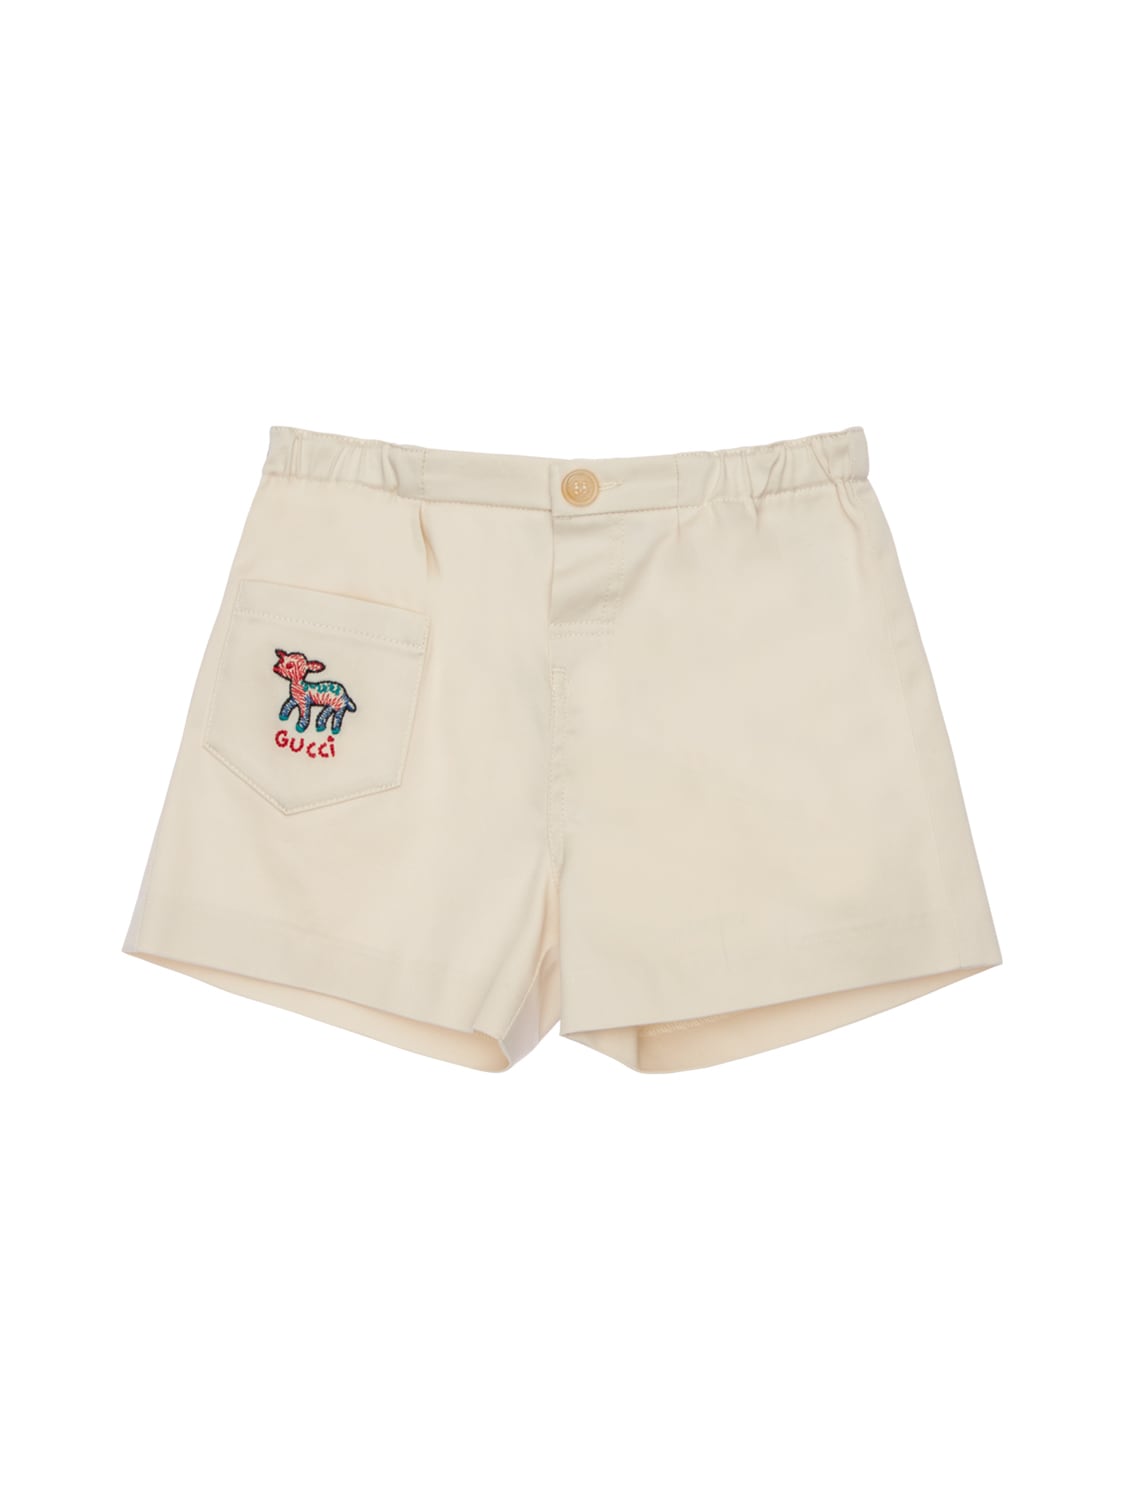 Gucci Kids' Stretch Gabardine Shorts W/ Embroidery In White